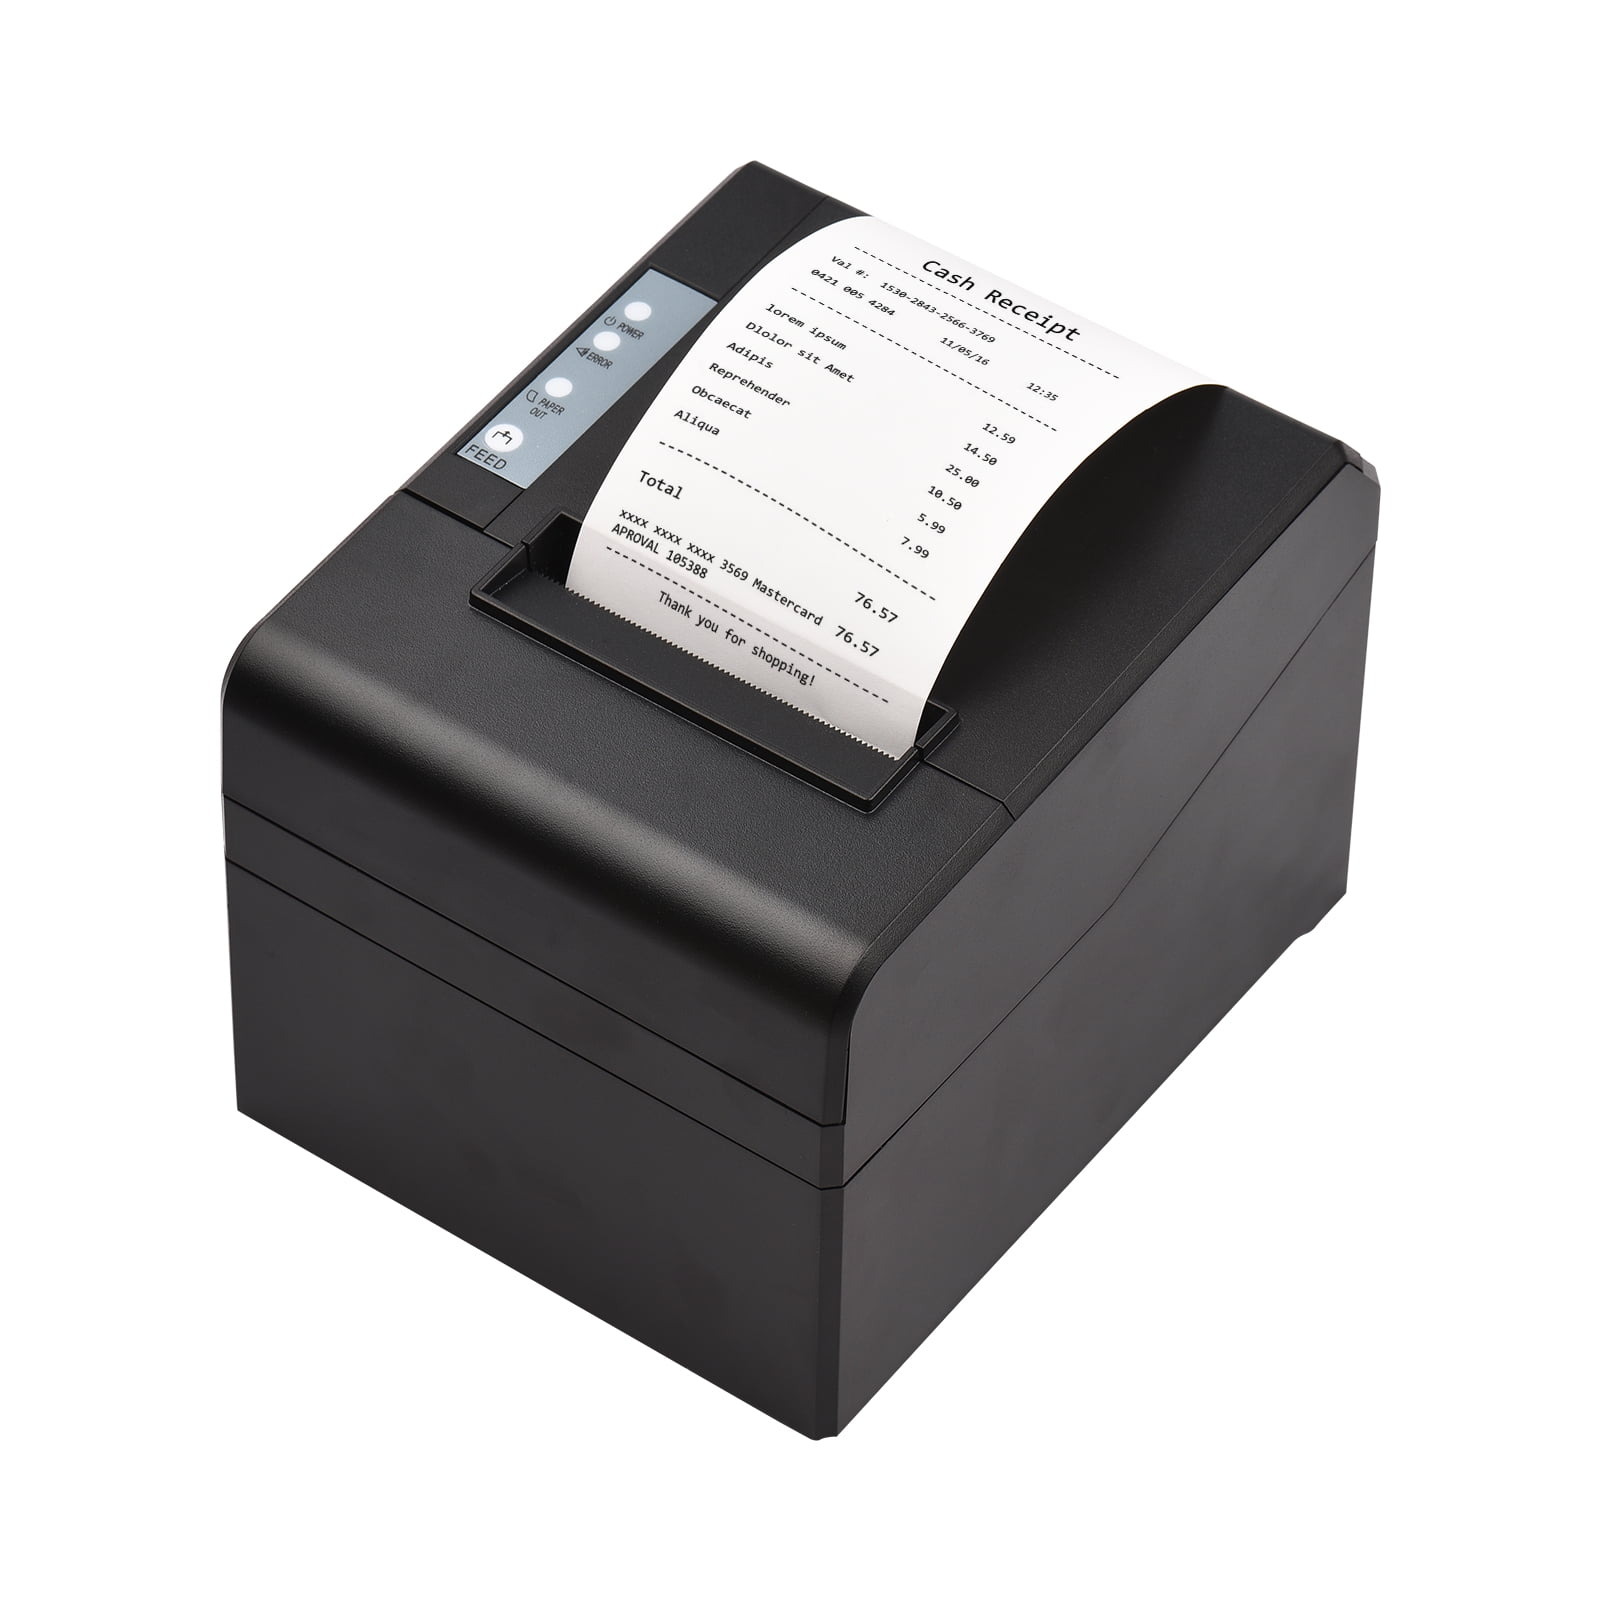 Thermal Receipt Printer Desktop Direct Thermal Printing Connection 300mm/s High Speed with Auto Cutter Support ESC/POS for Shipping Business Restaurant Kitchen Supermarket Store Walmart.com